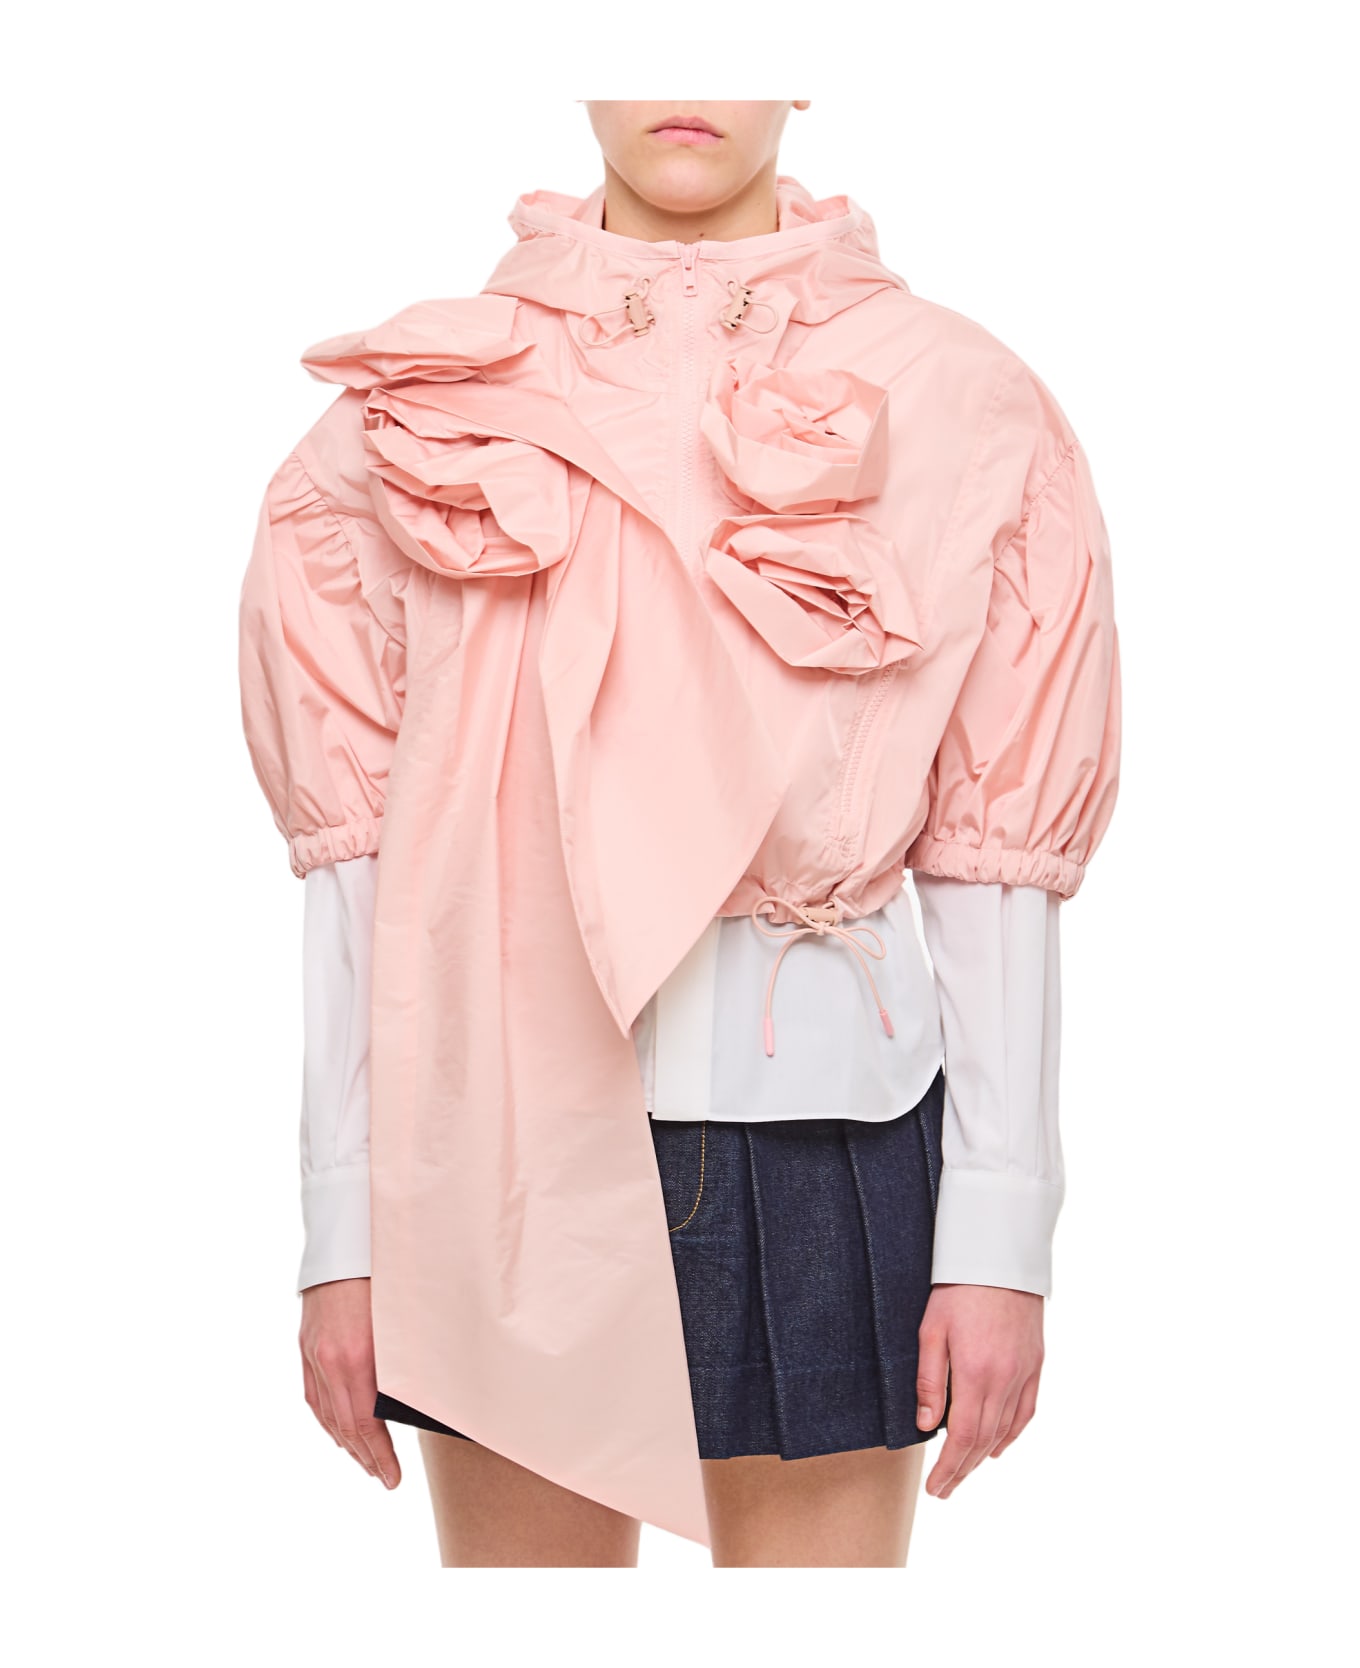 Simone Rocha Cropped Puff Sleeve Jacket W/ Turbo Pressed Roses - PINK